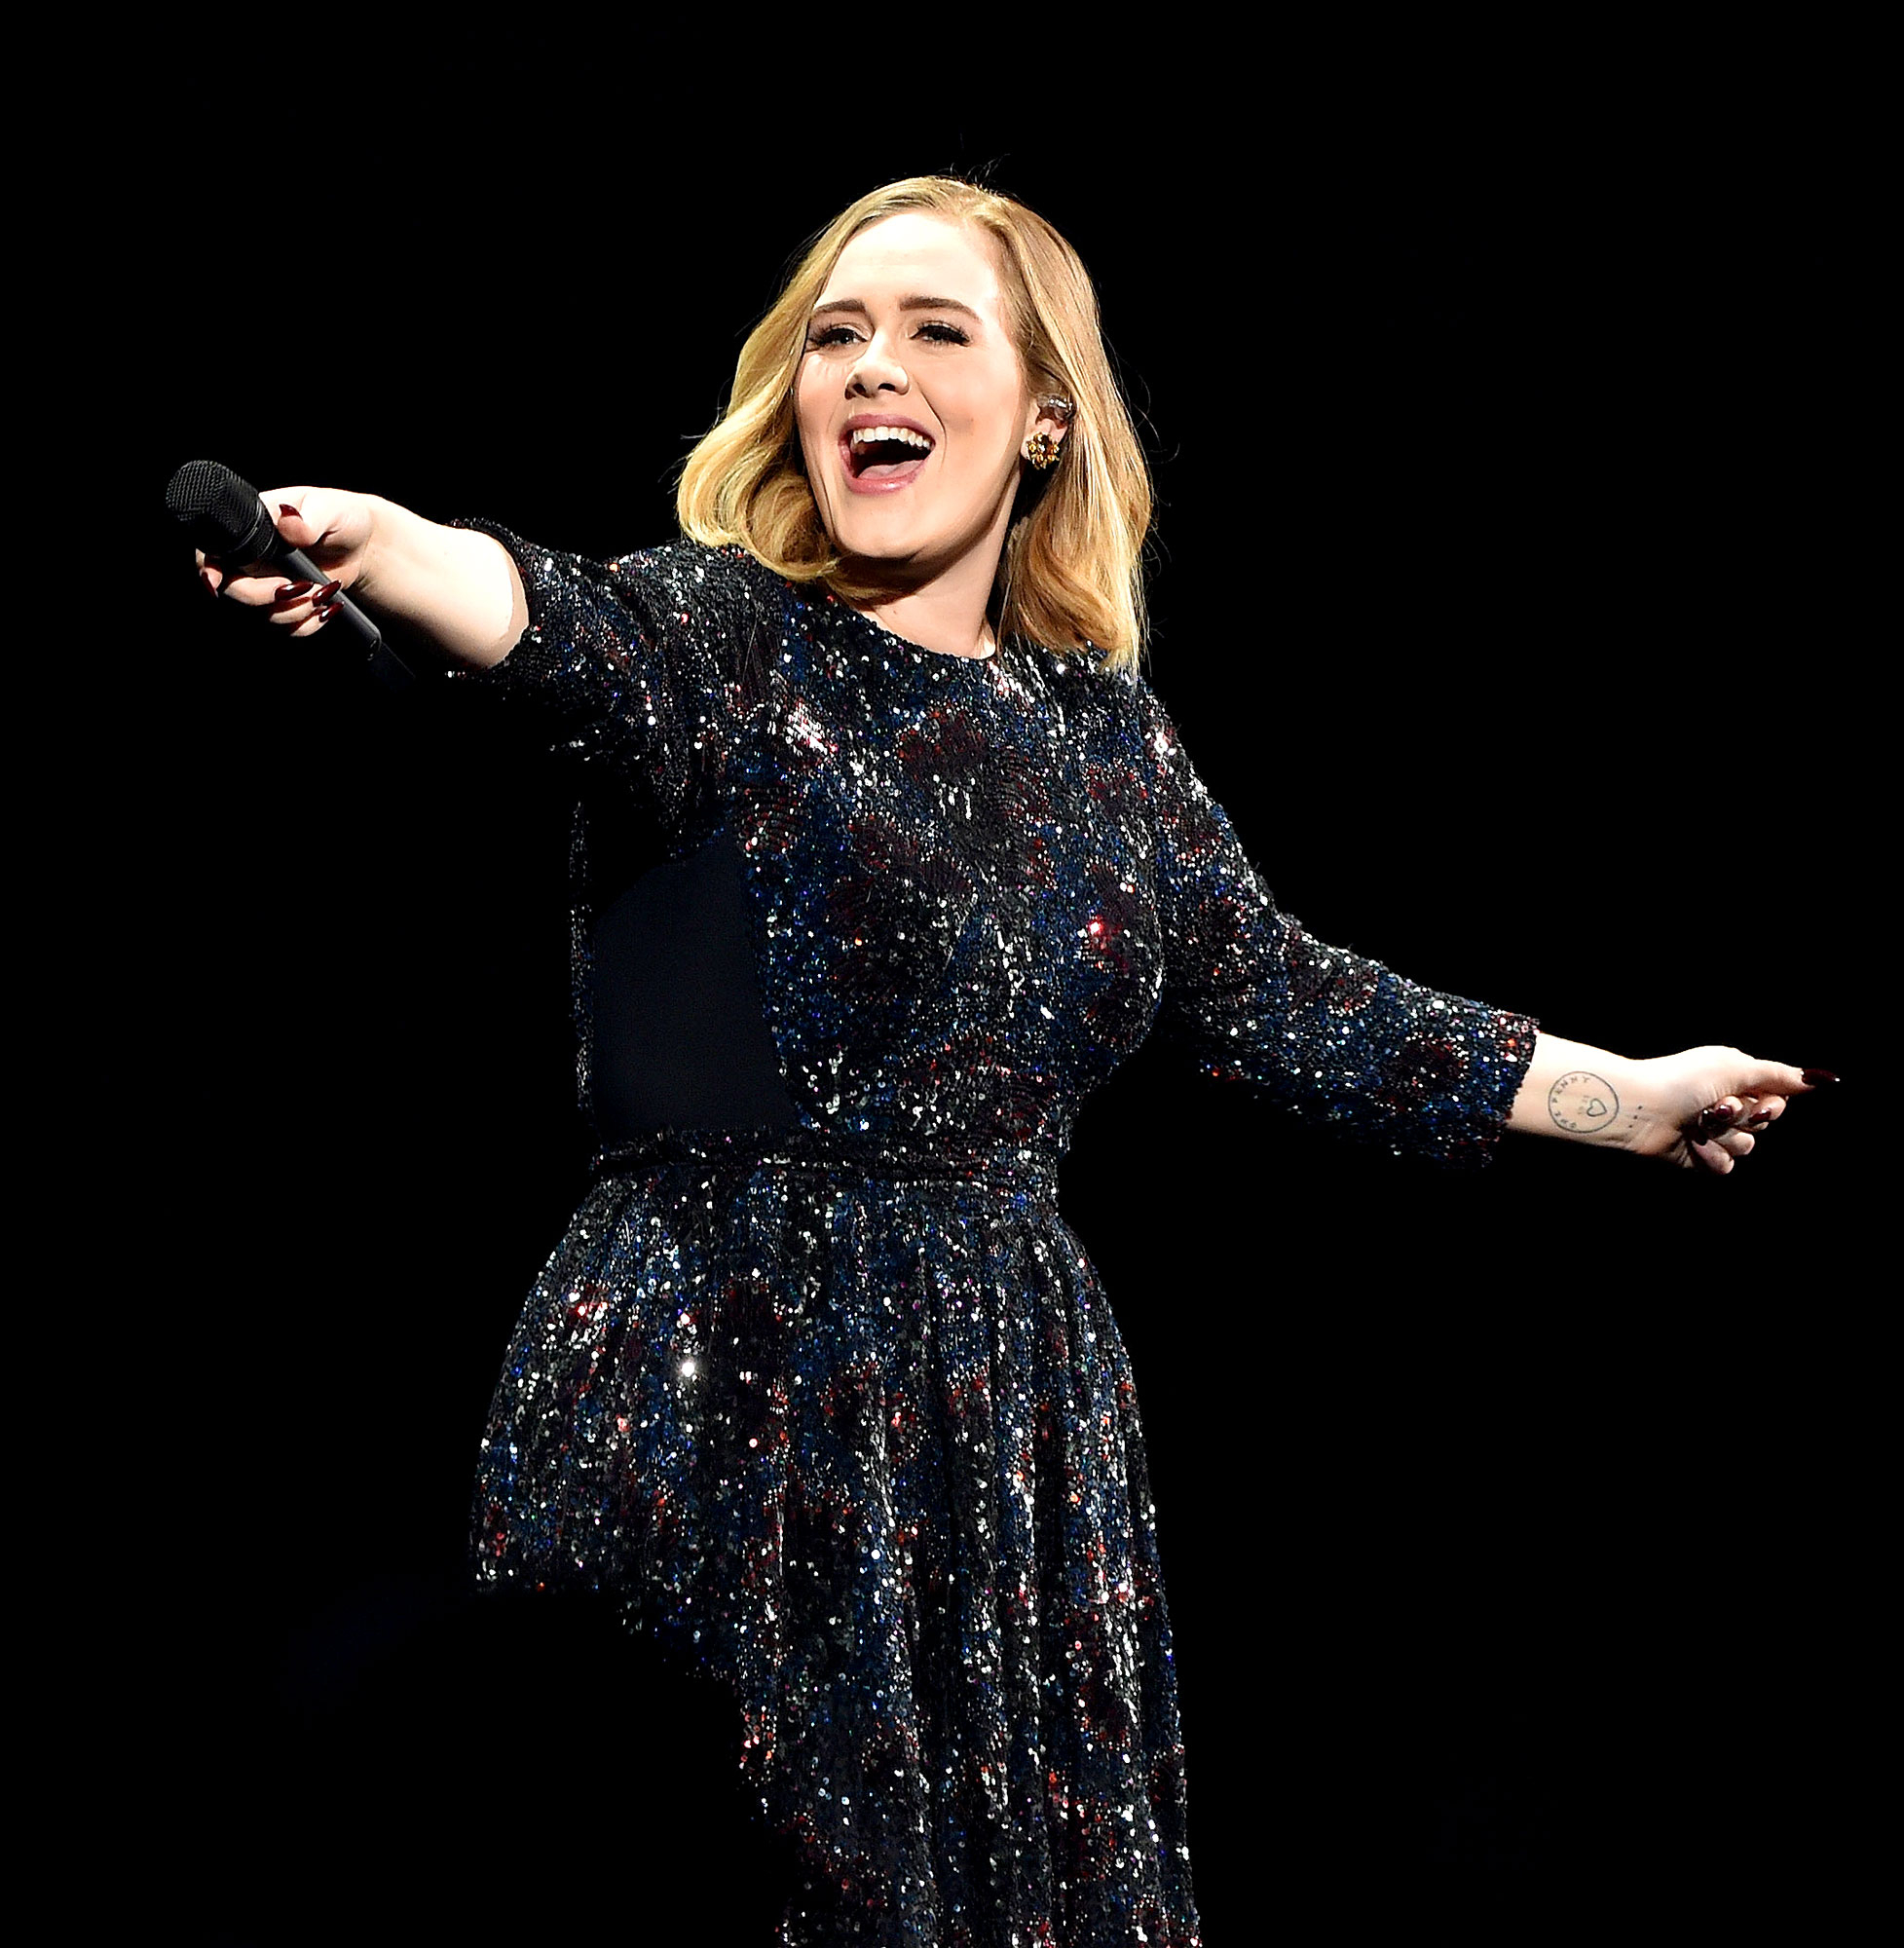 Adele hides behind her handbag as she sings along to her own song